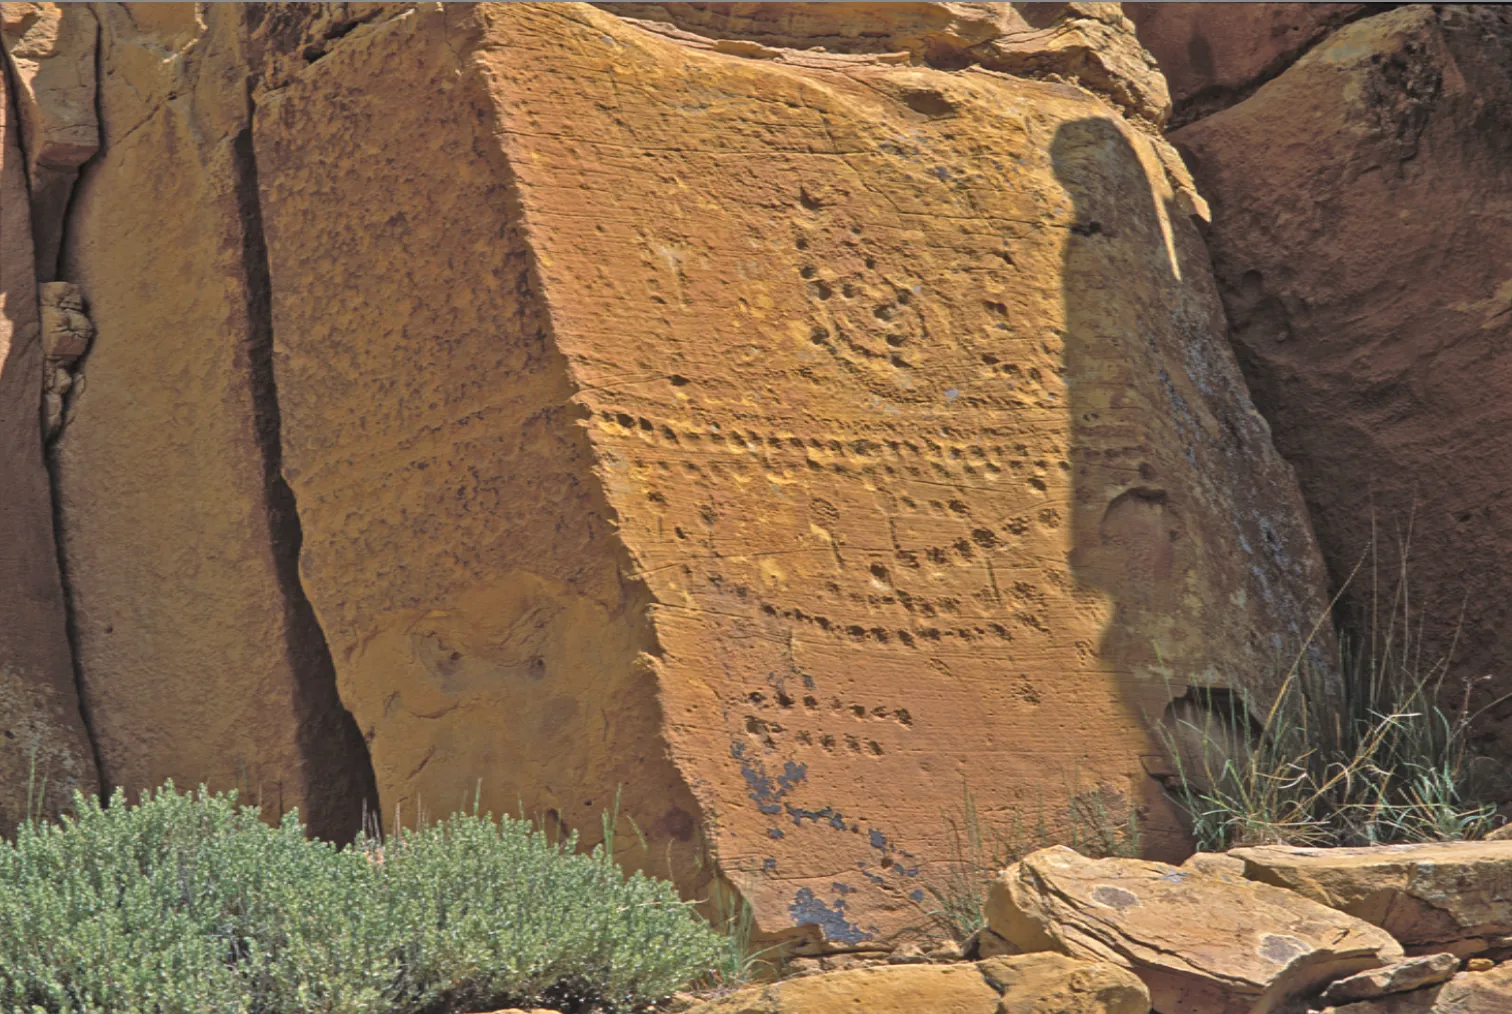 A photograph of a petroglyph somewhere in Arizona